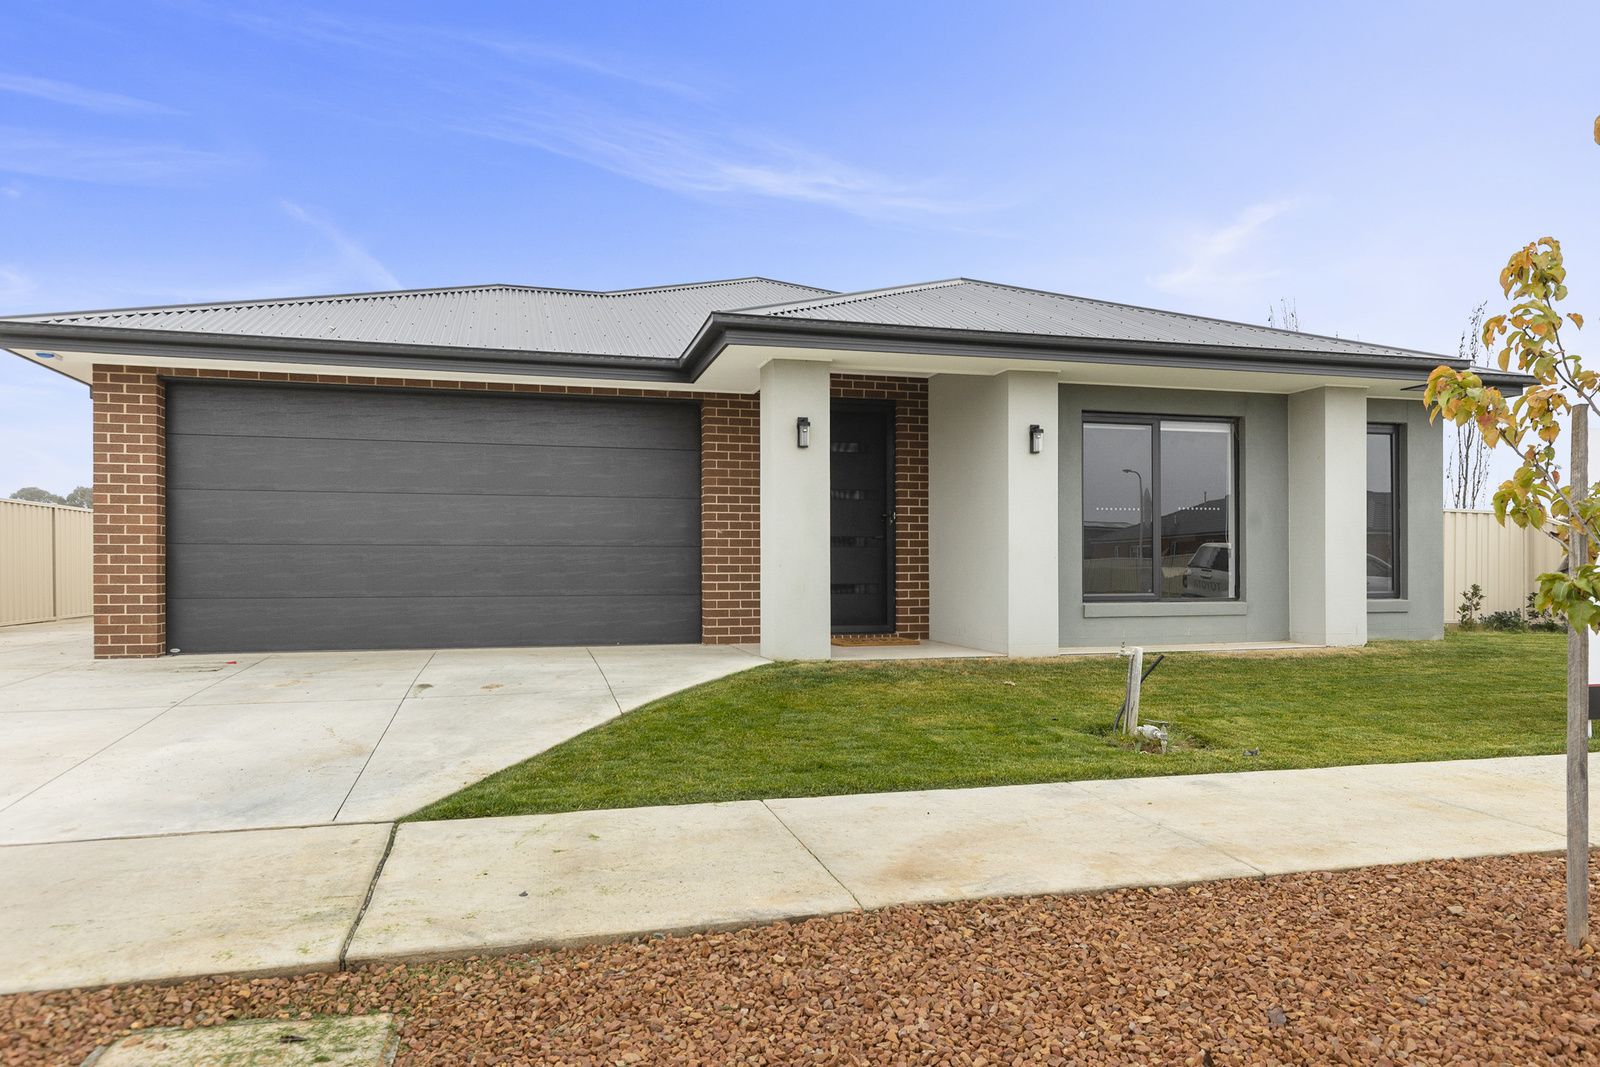 21 Jean Claude Ave, Nagambie VIC 3608, Image 0